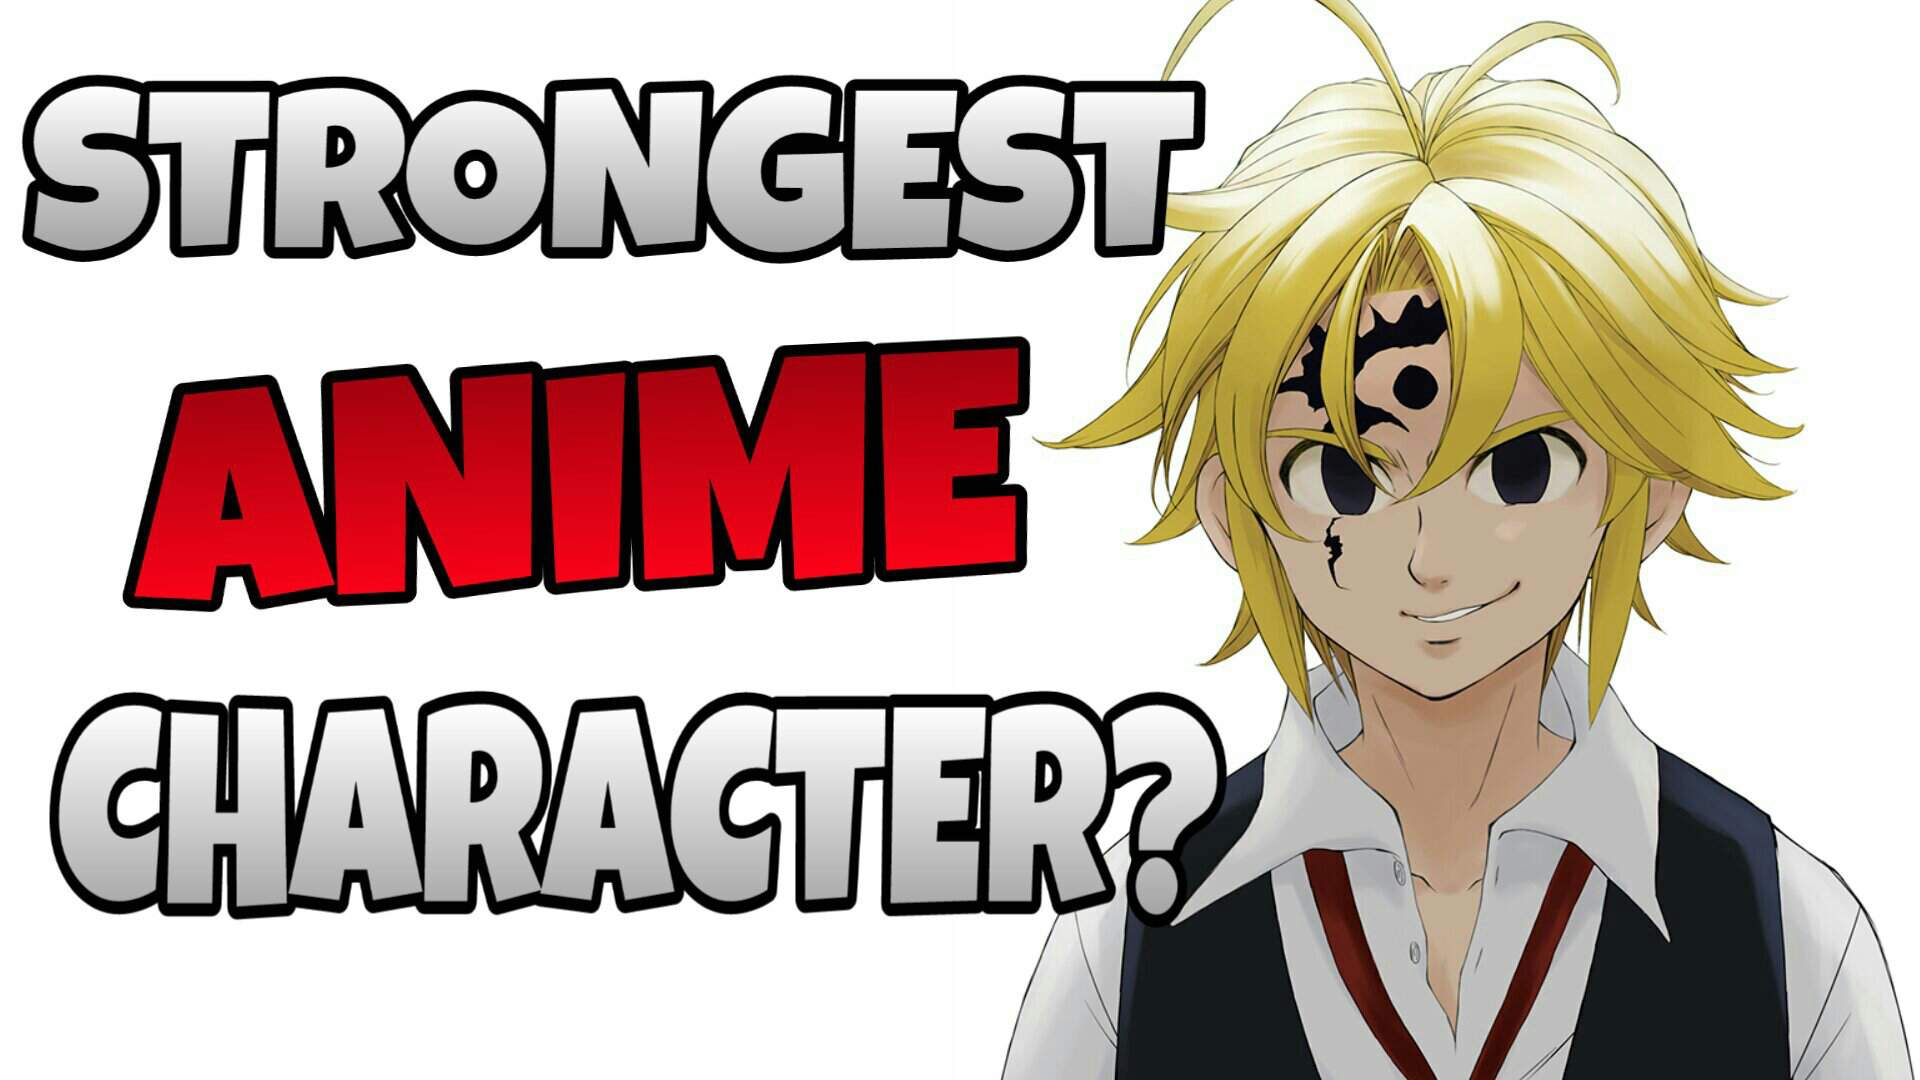 Is Meliodas one of the strongest anime characters? | Anime Amino